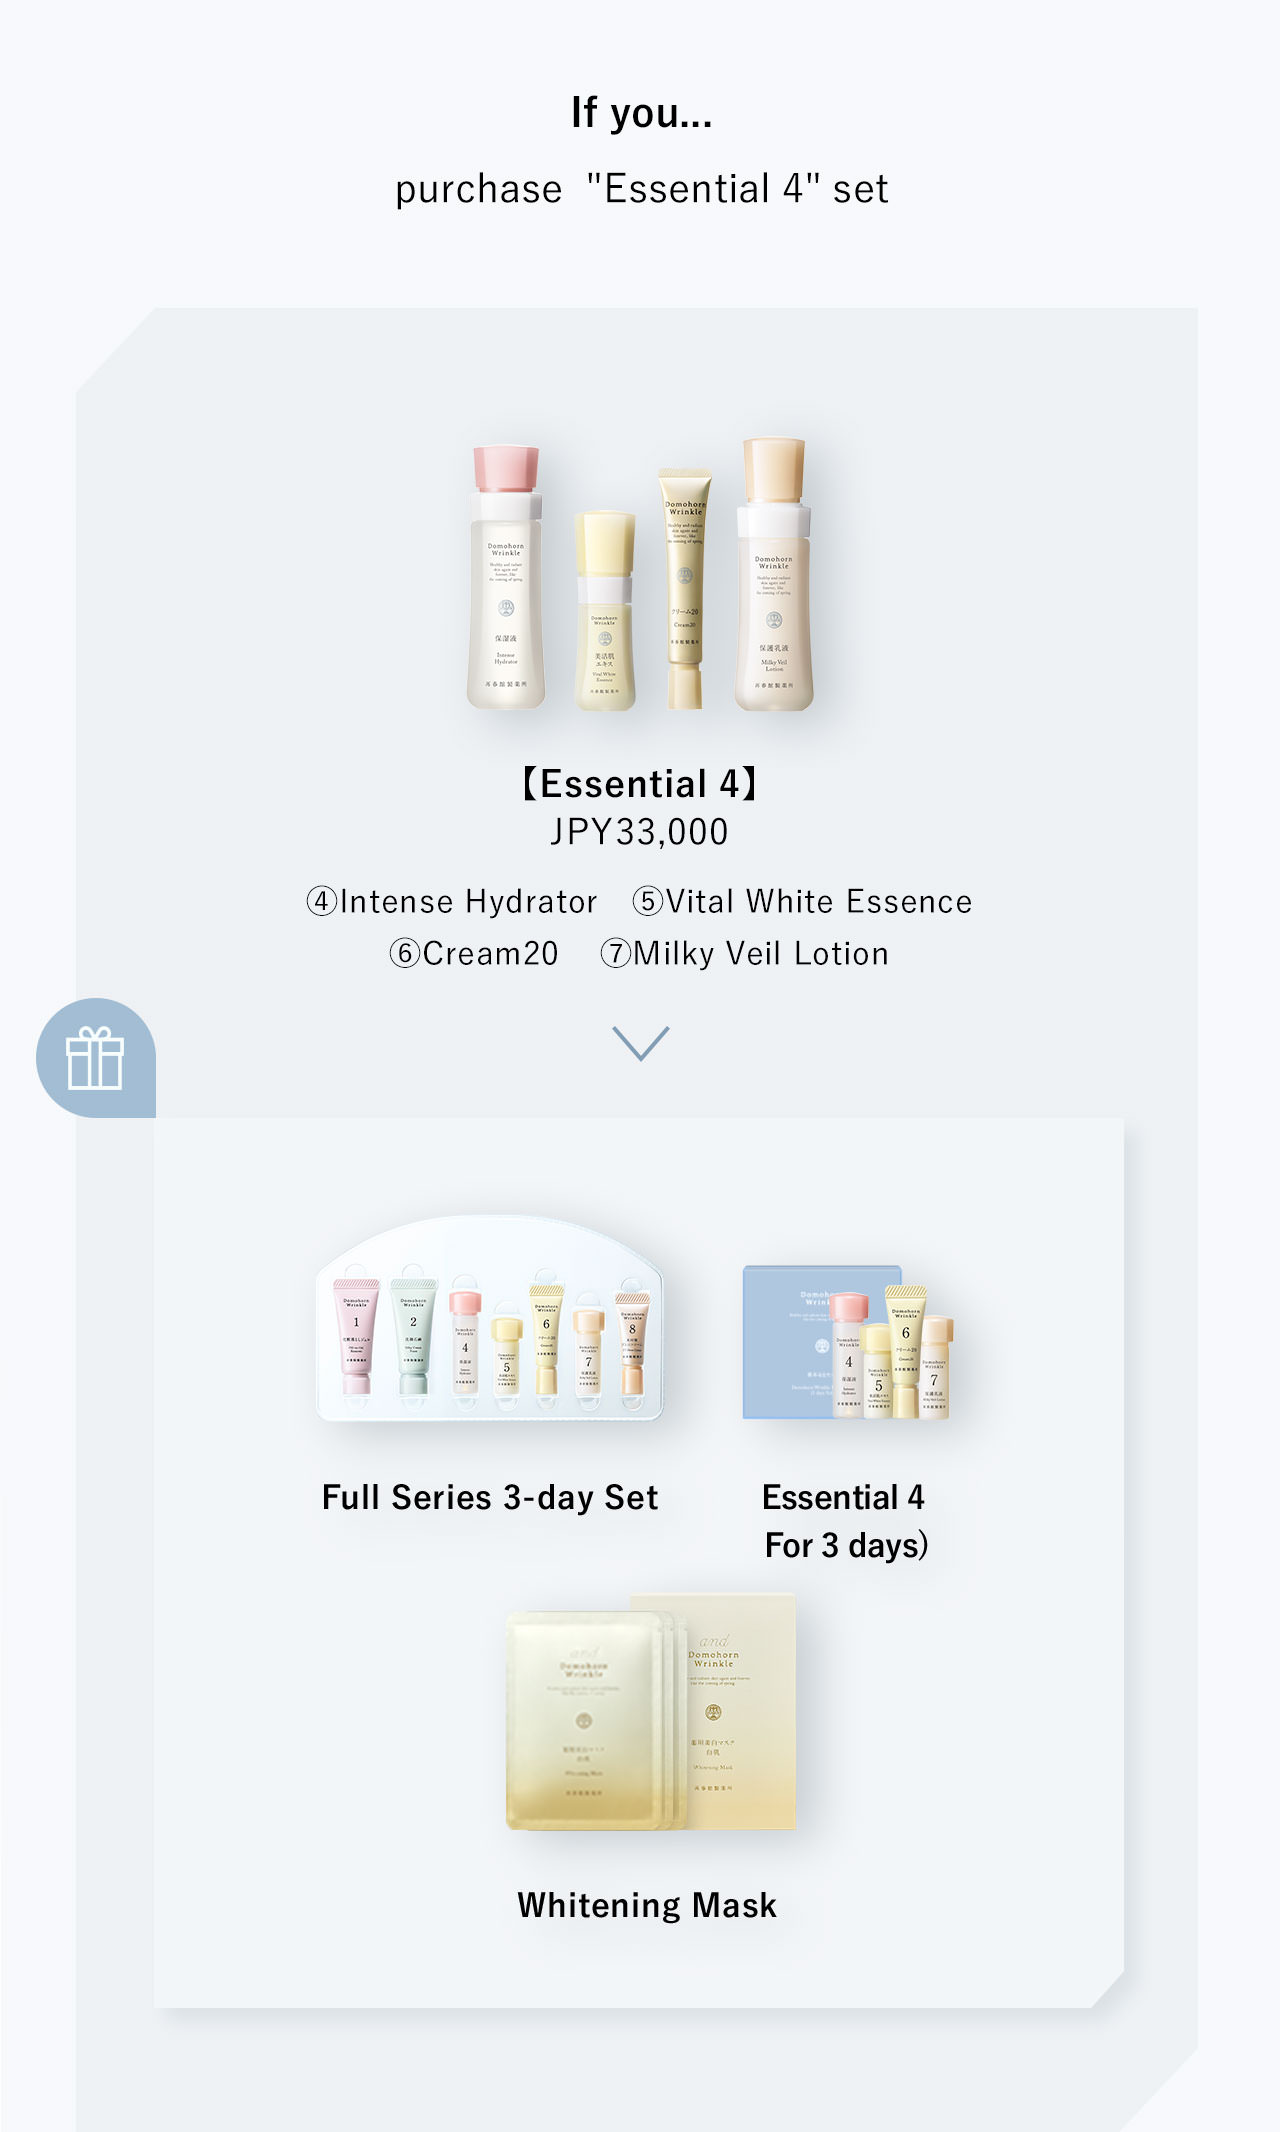 If you... purchase  "Essential 4" set. You get Full Series 3-day Set, Essential 4 (For 3 days) and Whitening Mask.